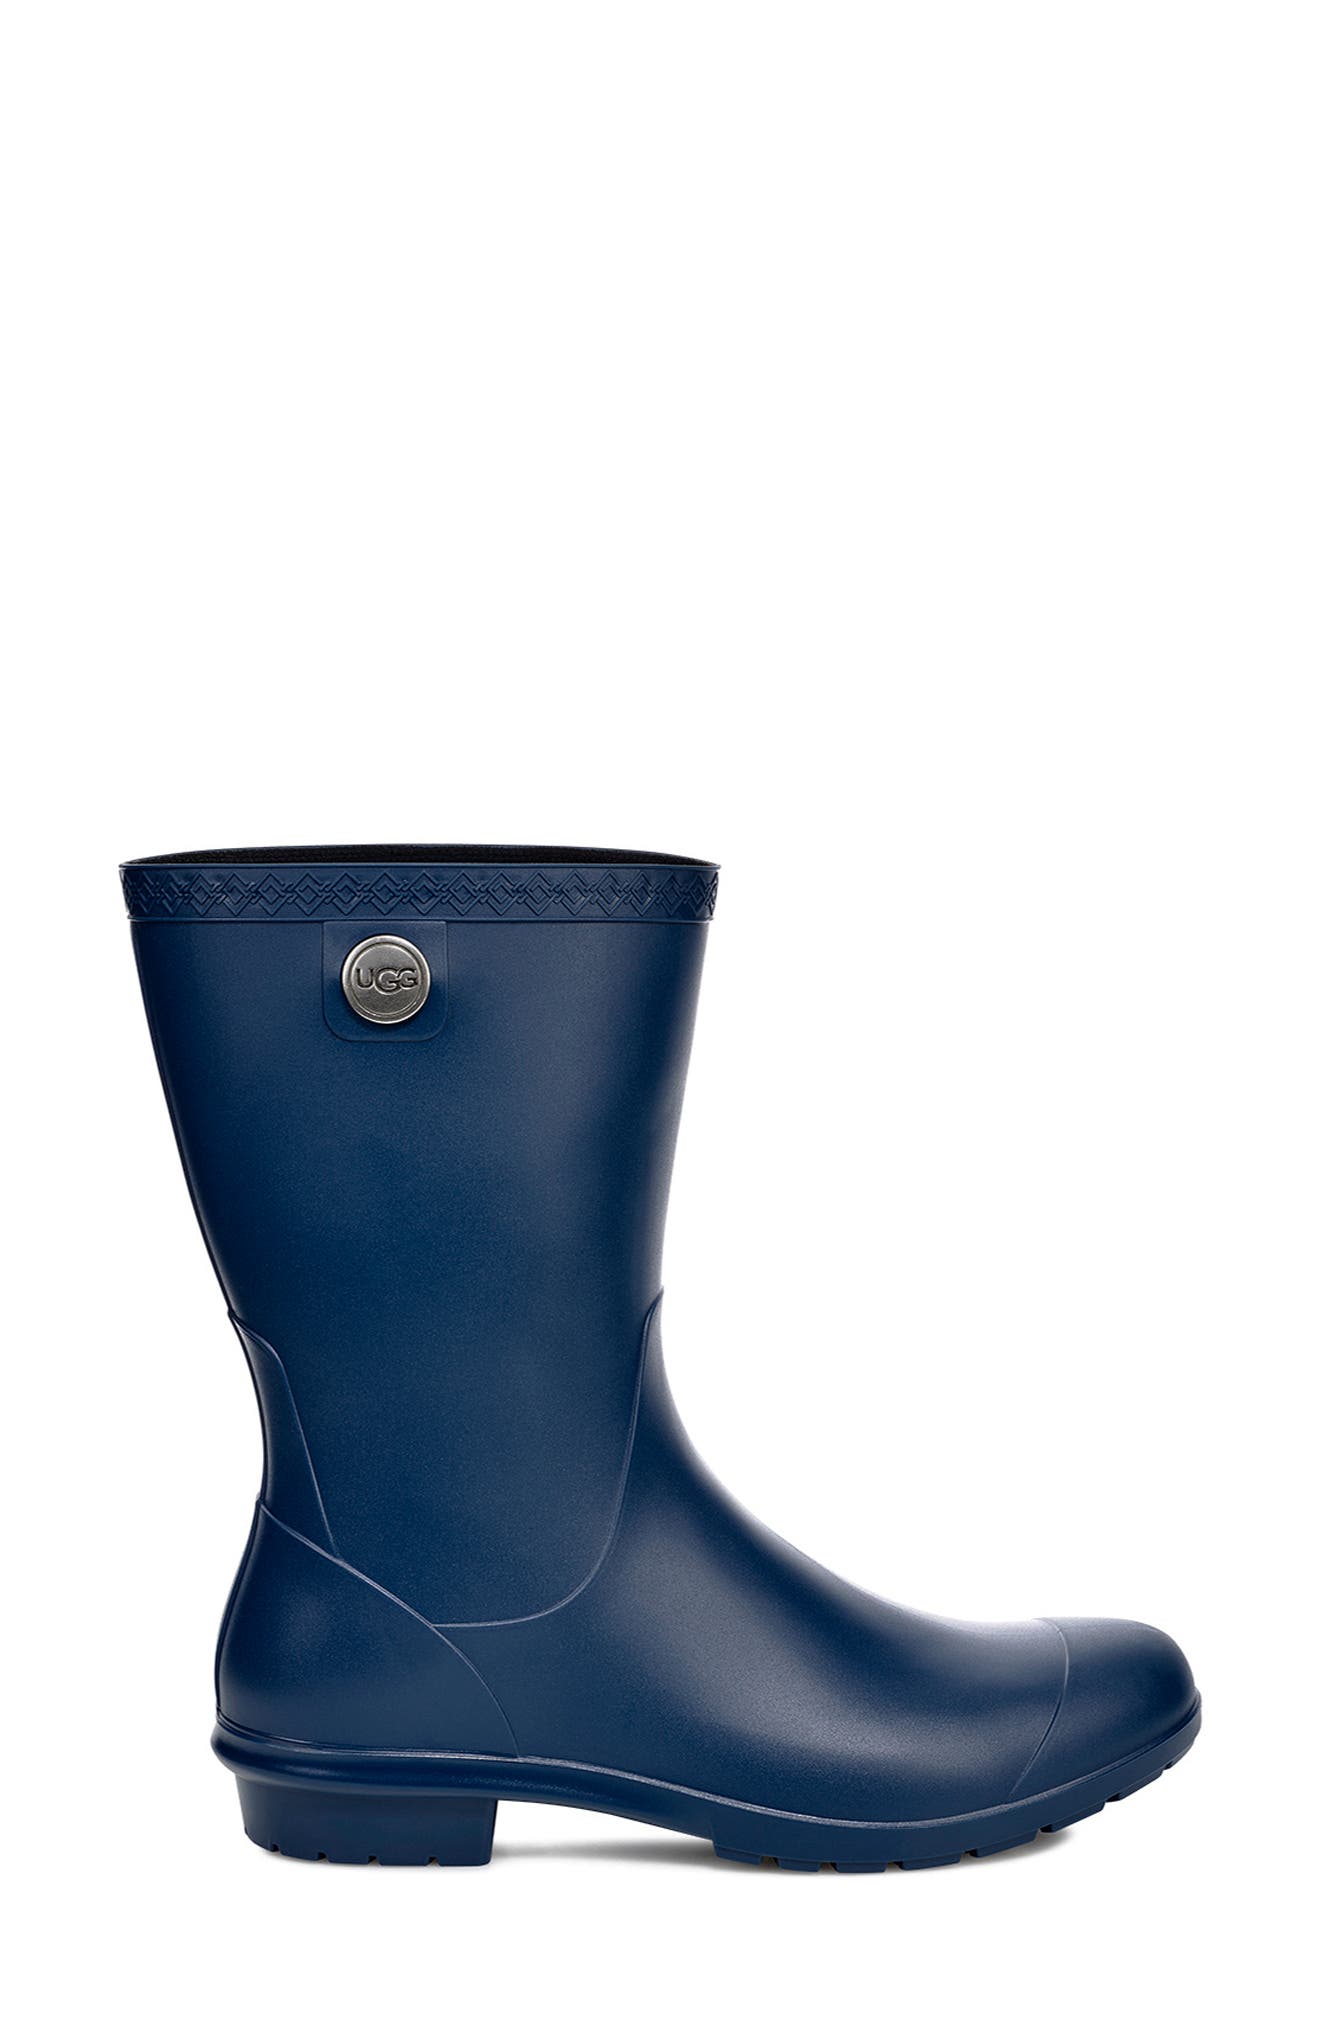 shearling lined rain boots